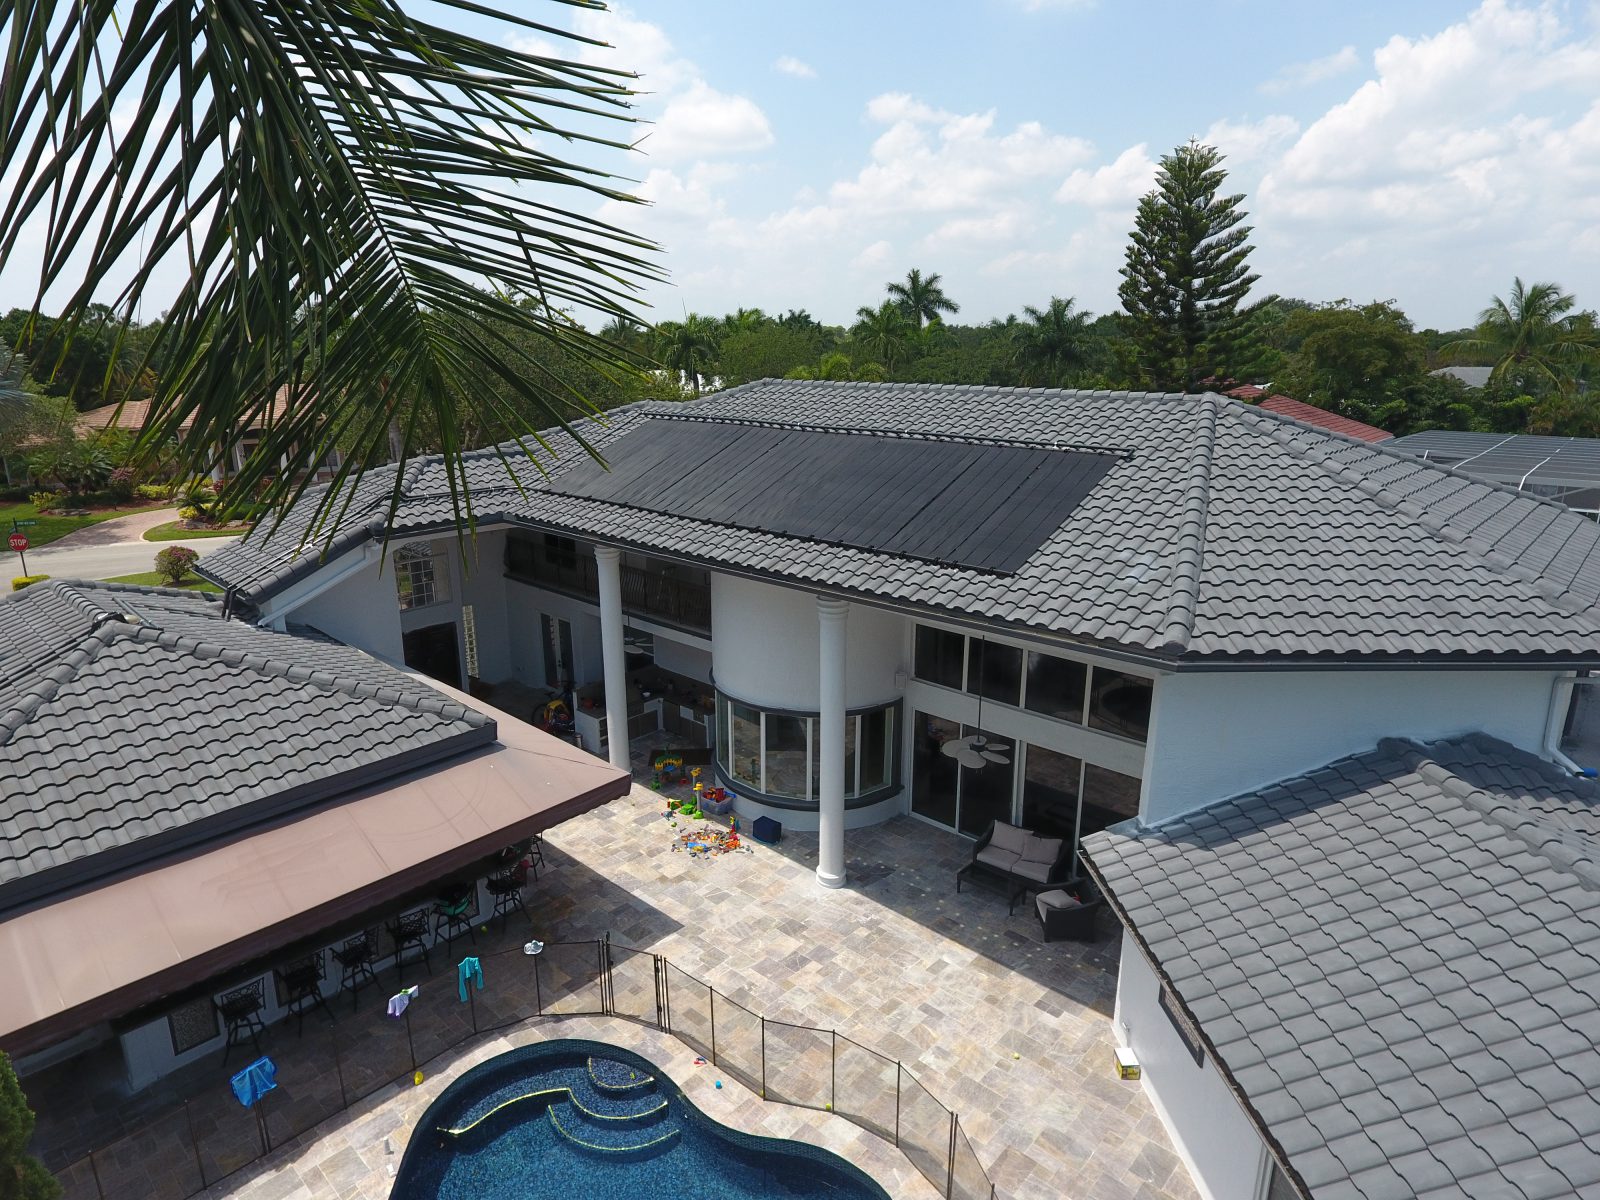 Picture of a pool solar heater mounted on a residential roof